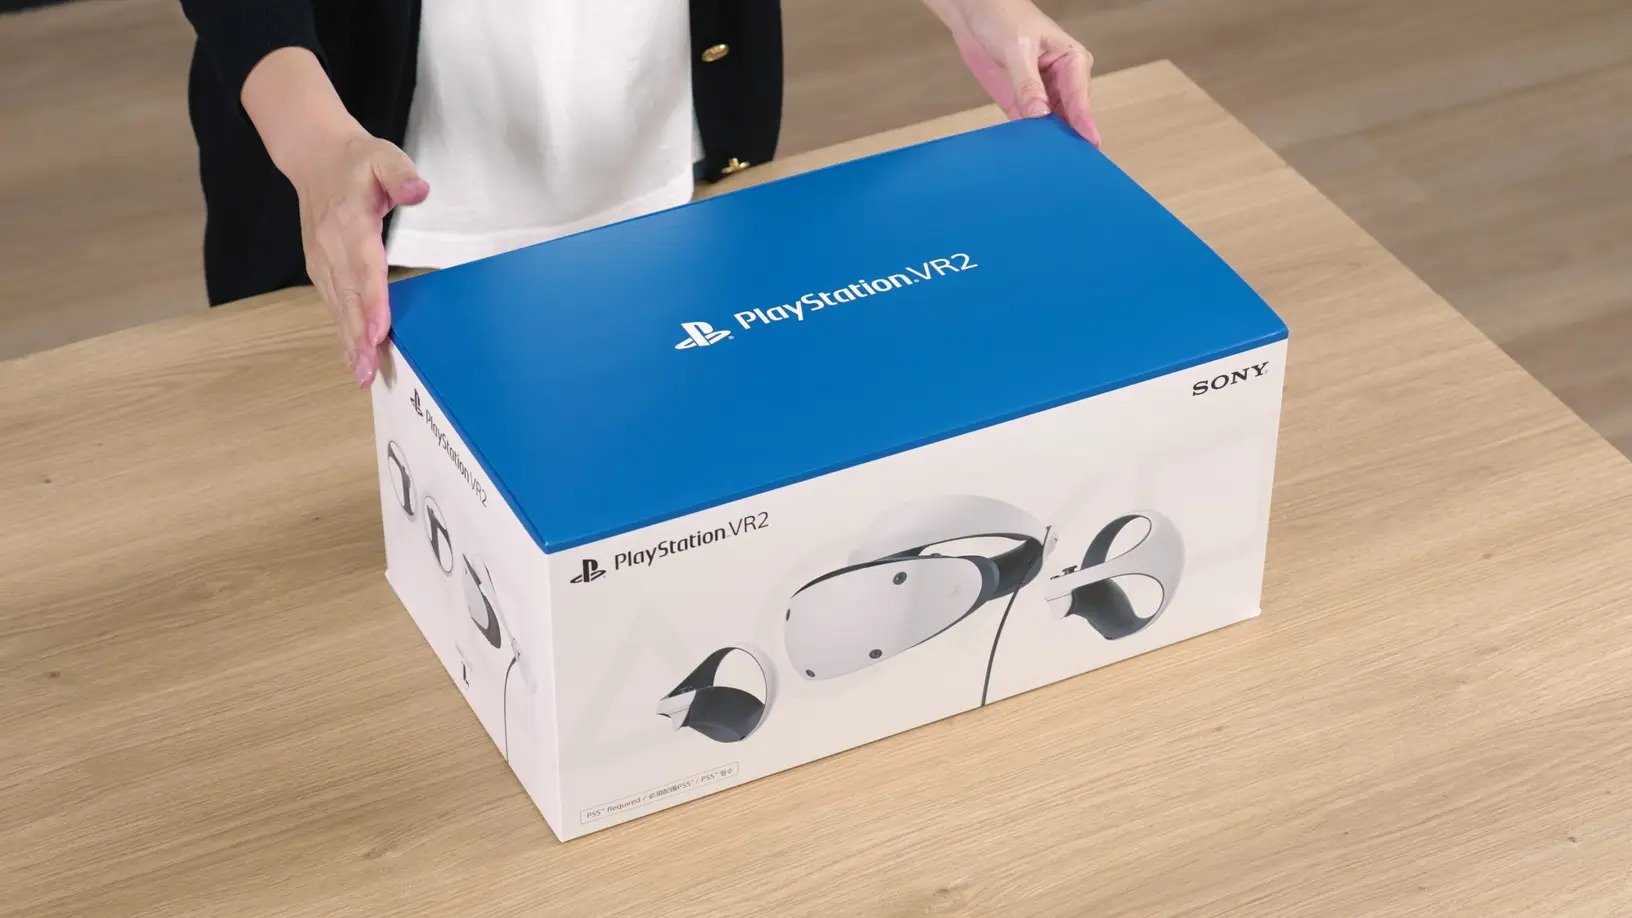 PSVR2 Unboxing, Horizon Call of the Mountain Bundle